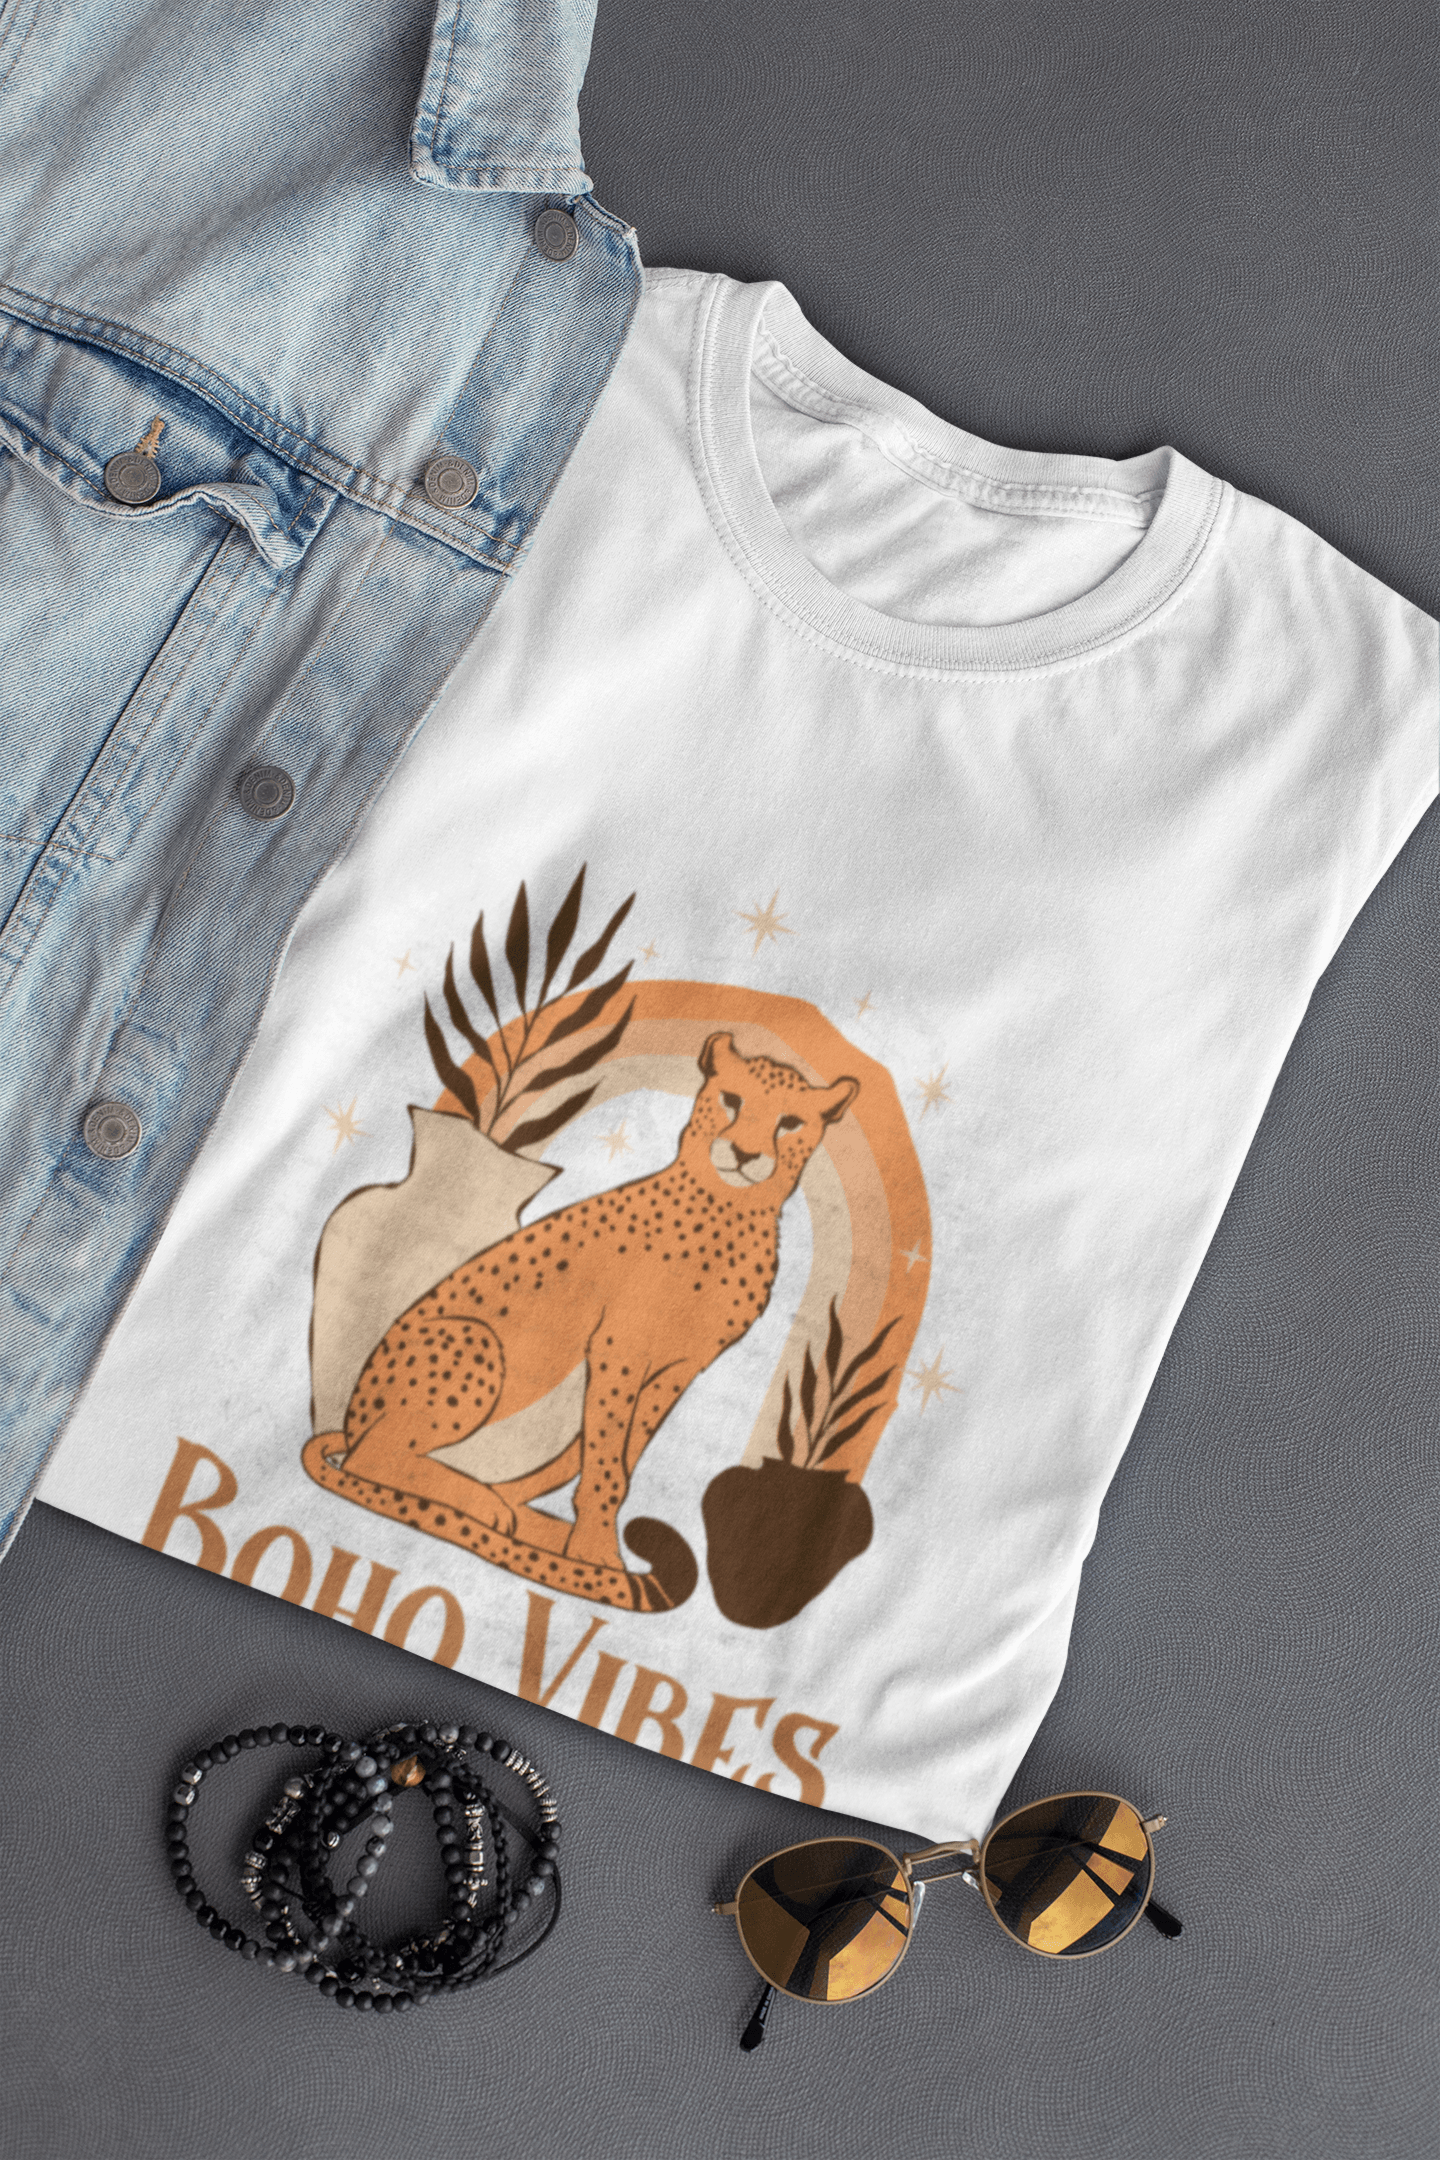 Boho Vibes T-Shirt - The Accessorys Official